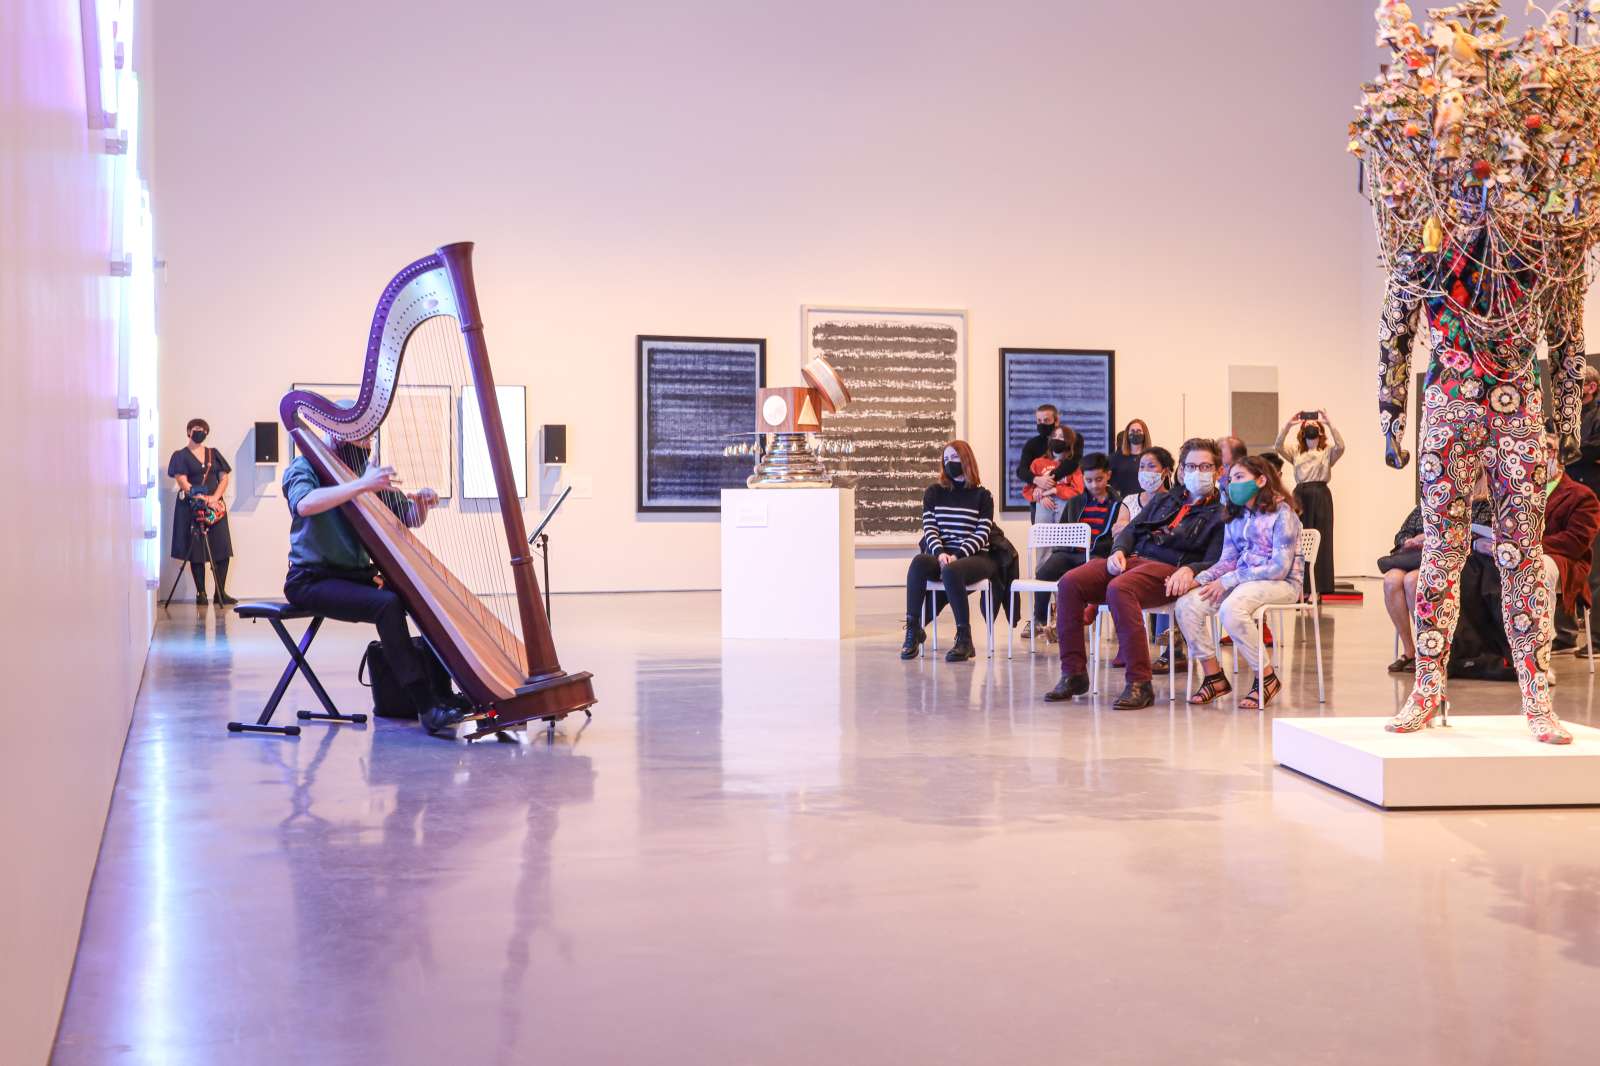 Harpist Performing on the left side of the screen to an audience pictured on the right side.